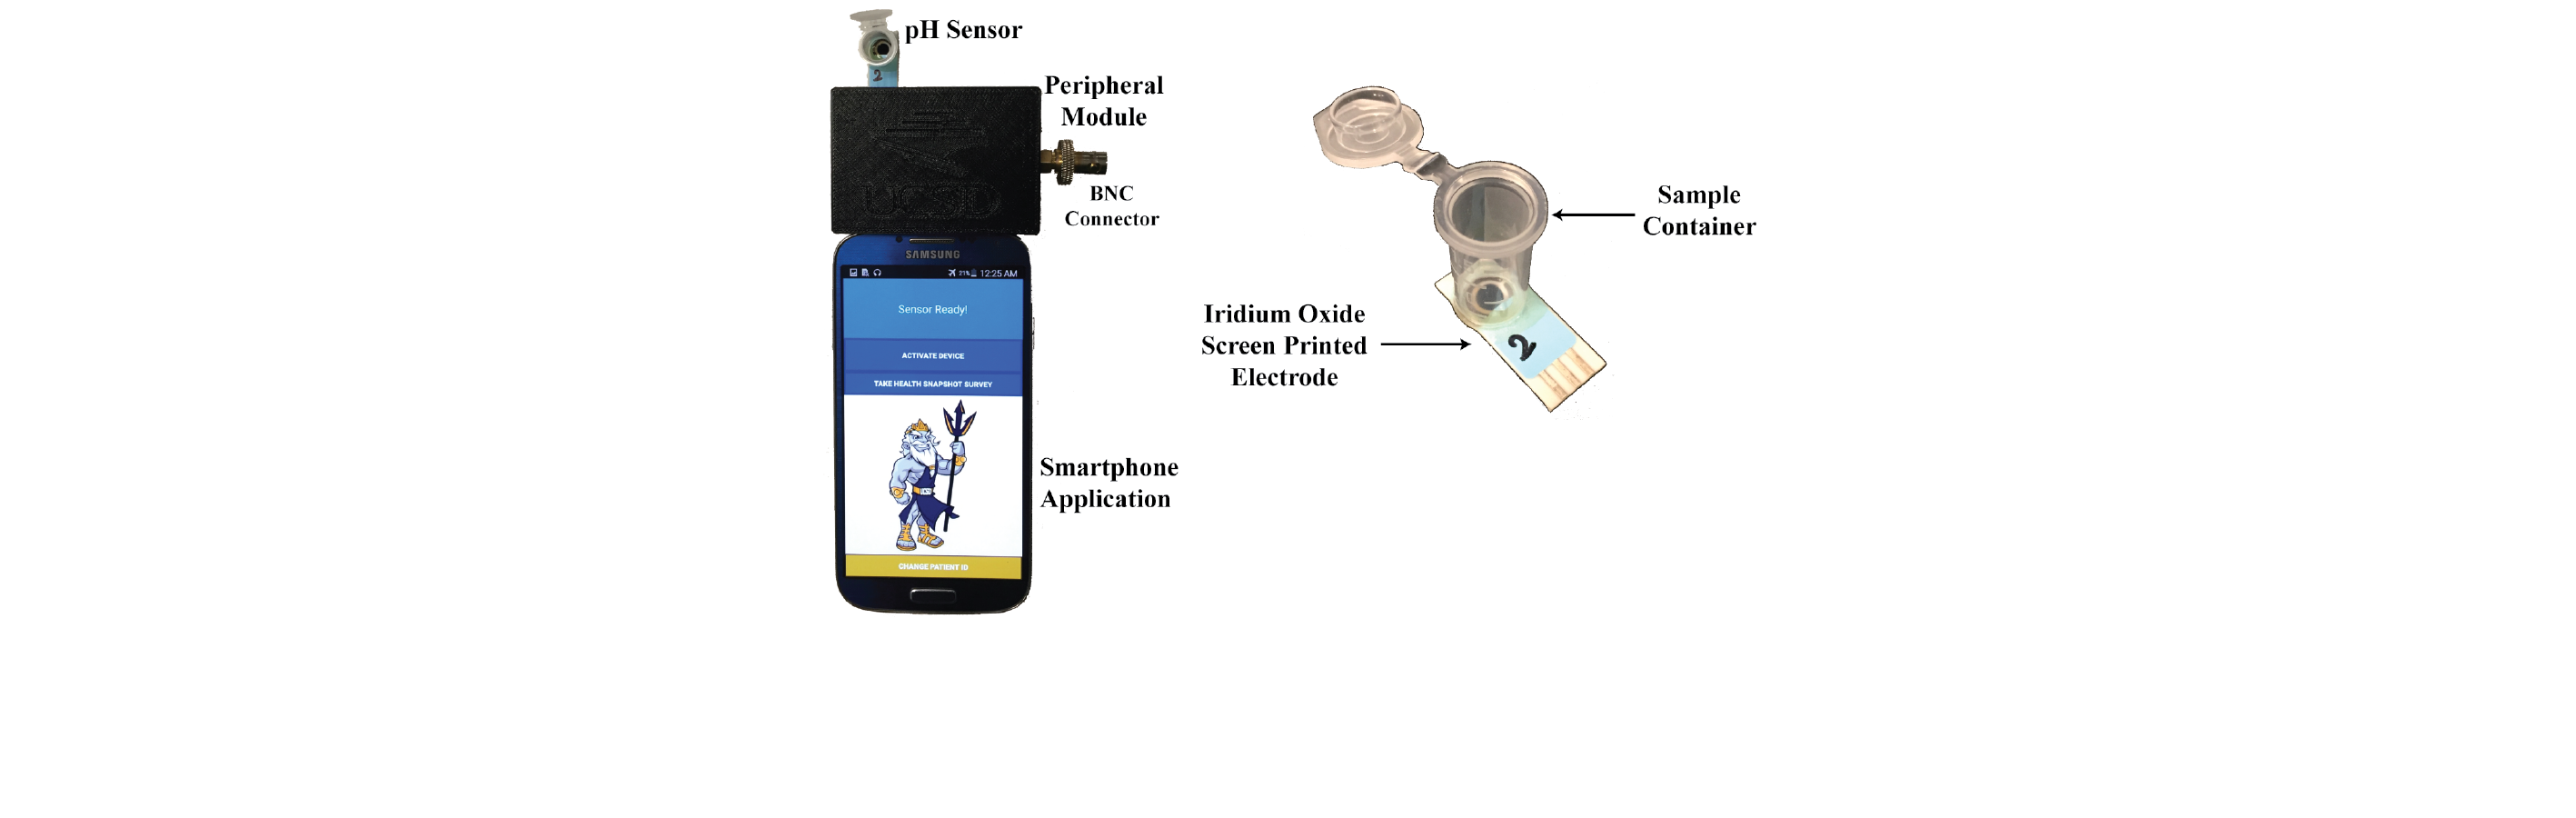 Smartphone-based pH sensor for at-home monitoring of cystic fibrosis